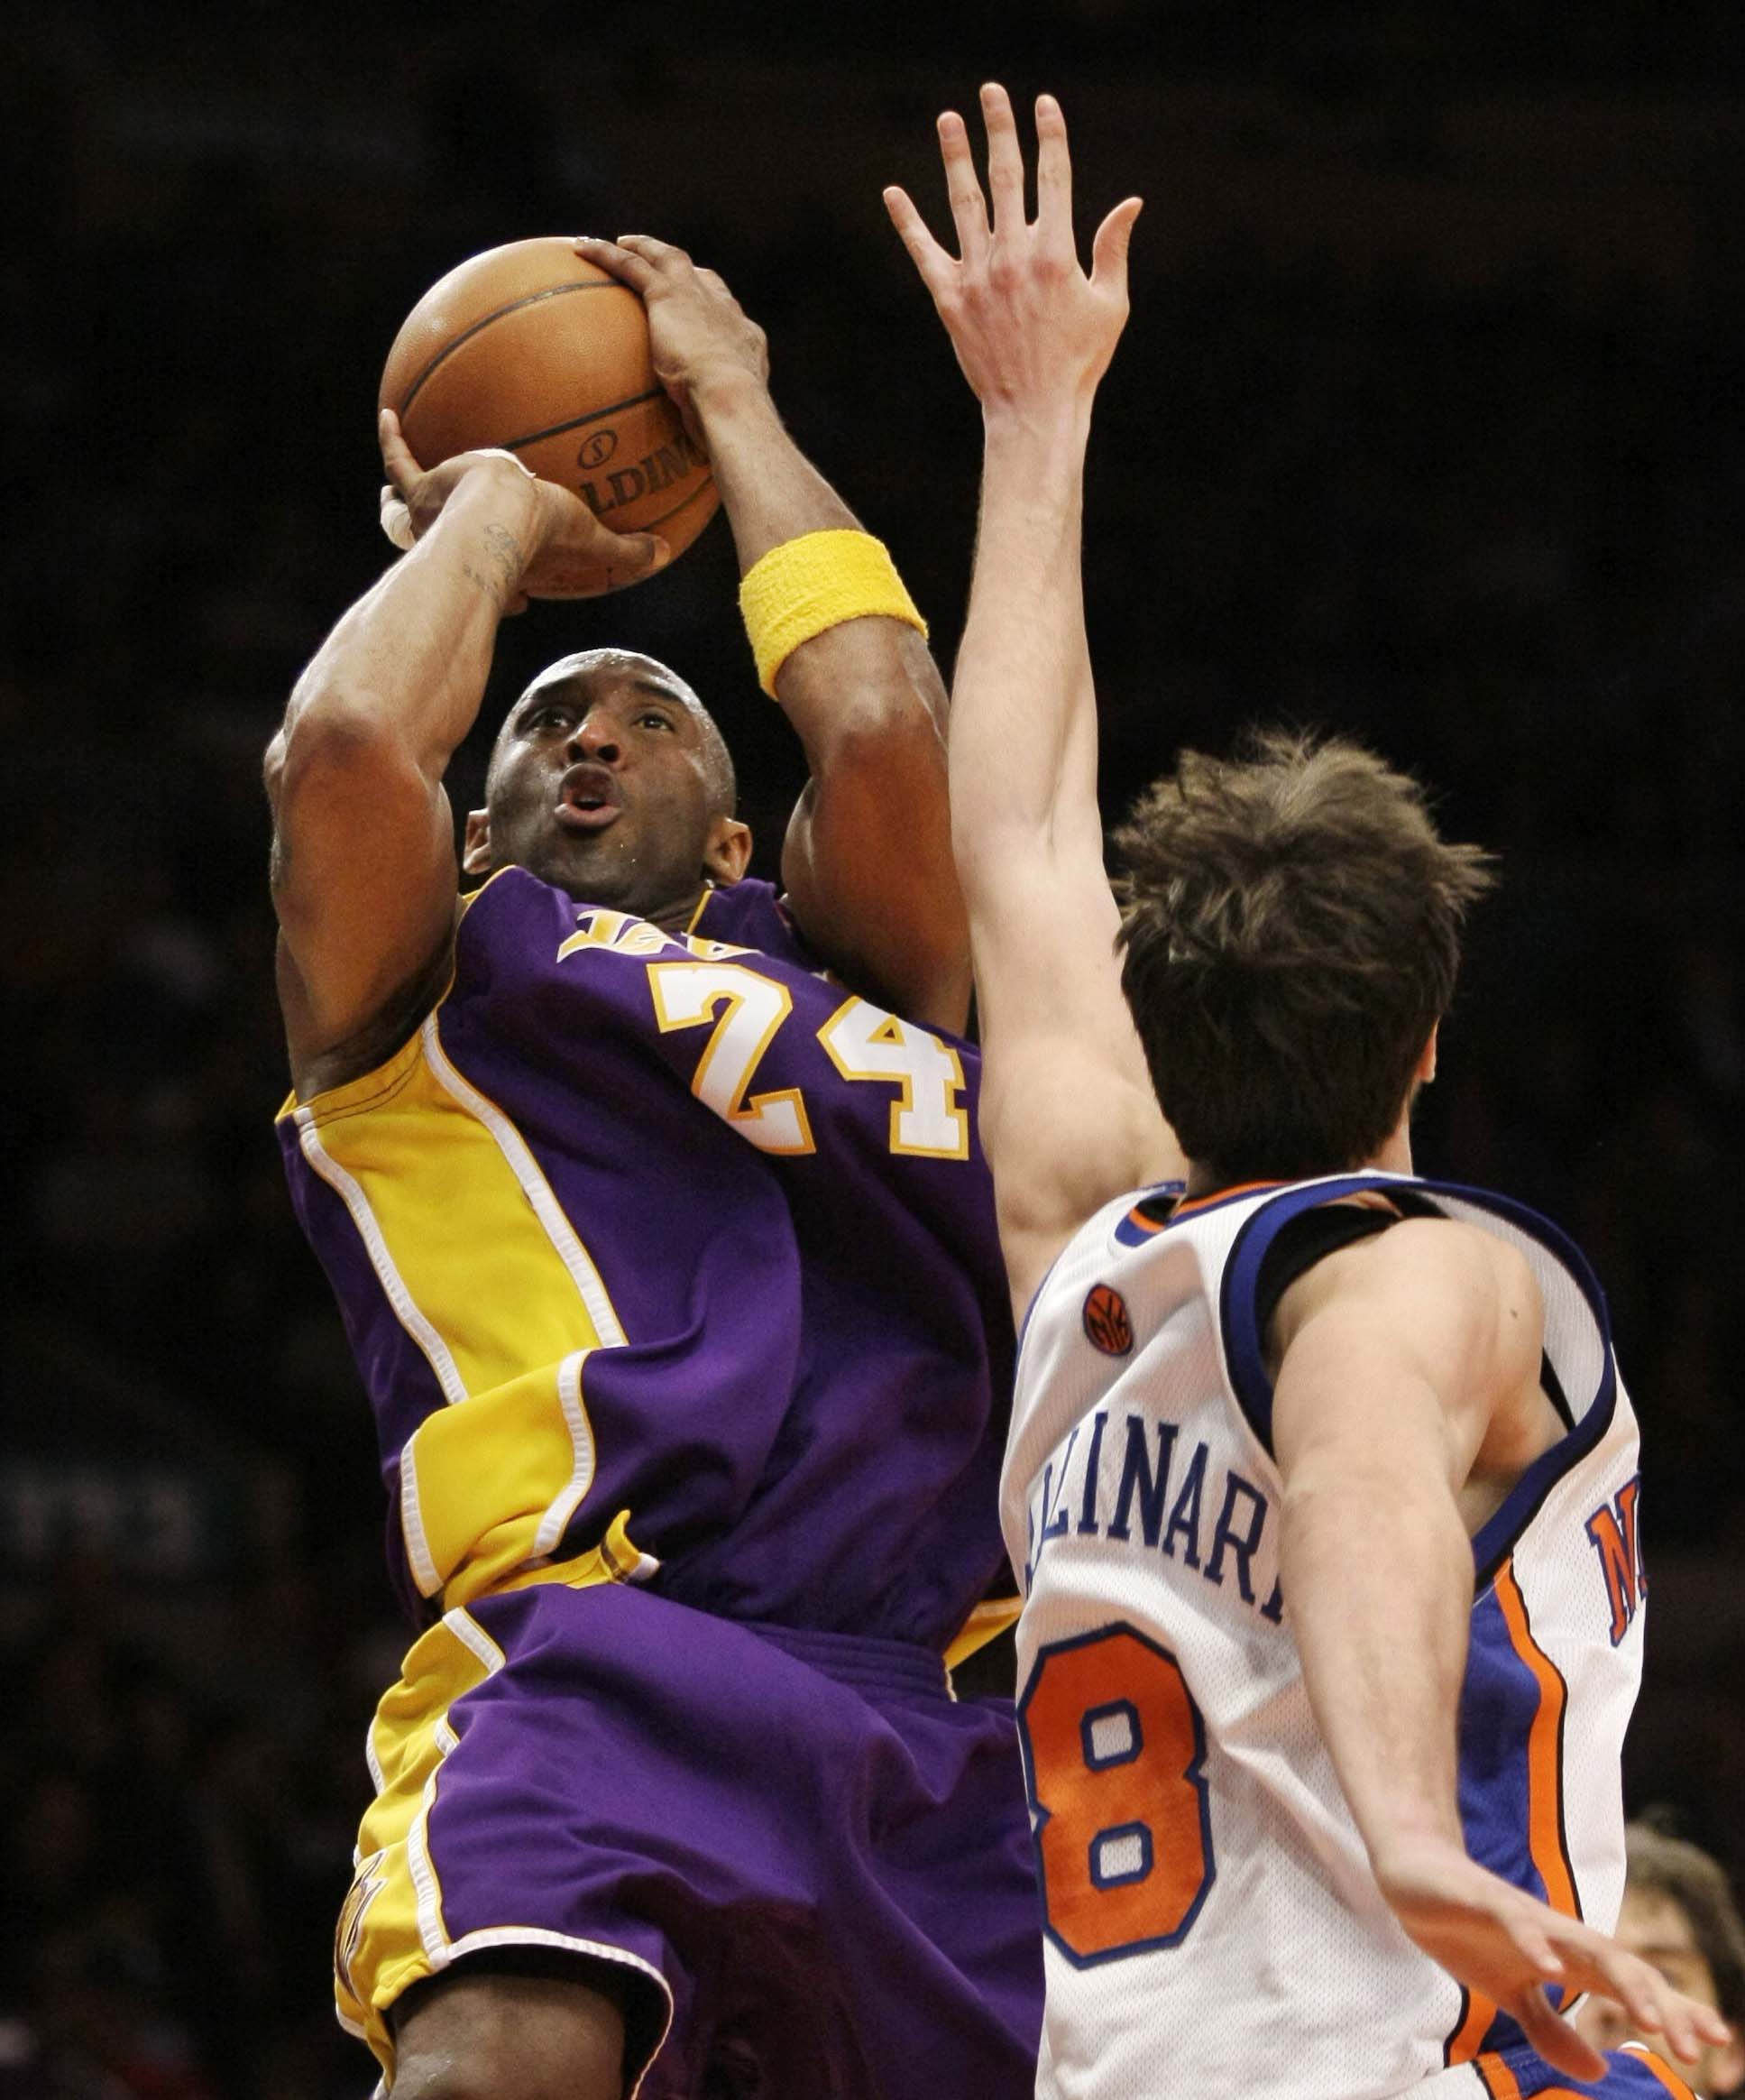 Los Angeles Lakers guard Kobe Bryant (24) shoots over New York Knicks forward Danilo Gallinari (8) in the fourth quarter of an NBA basketball game at Madison Square Garden in New York, Monday, Feb. 2, 2009. Bryant had 61 points in the game as the Lakers won 126-117. (AP Photo/Kathy Willens)